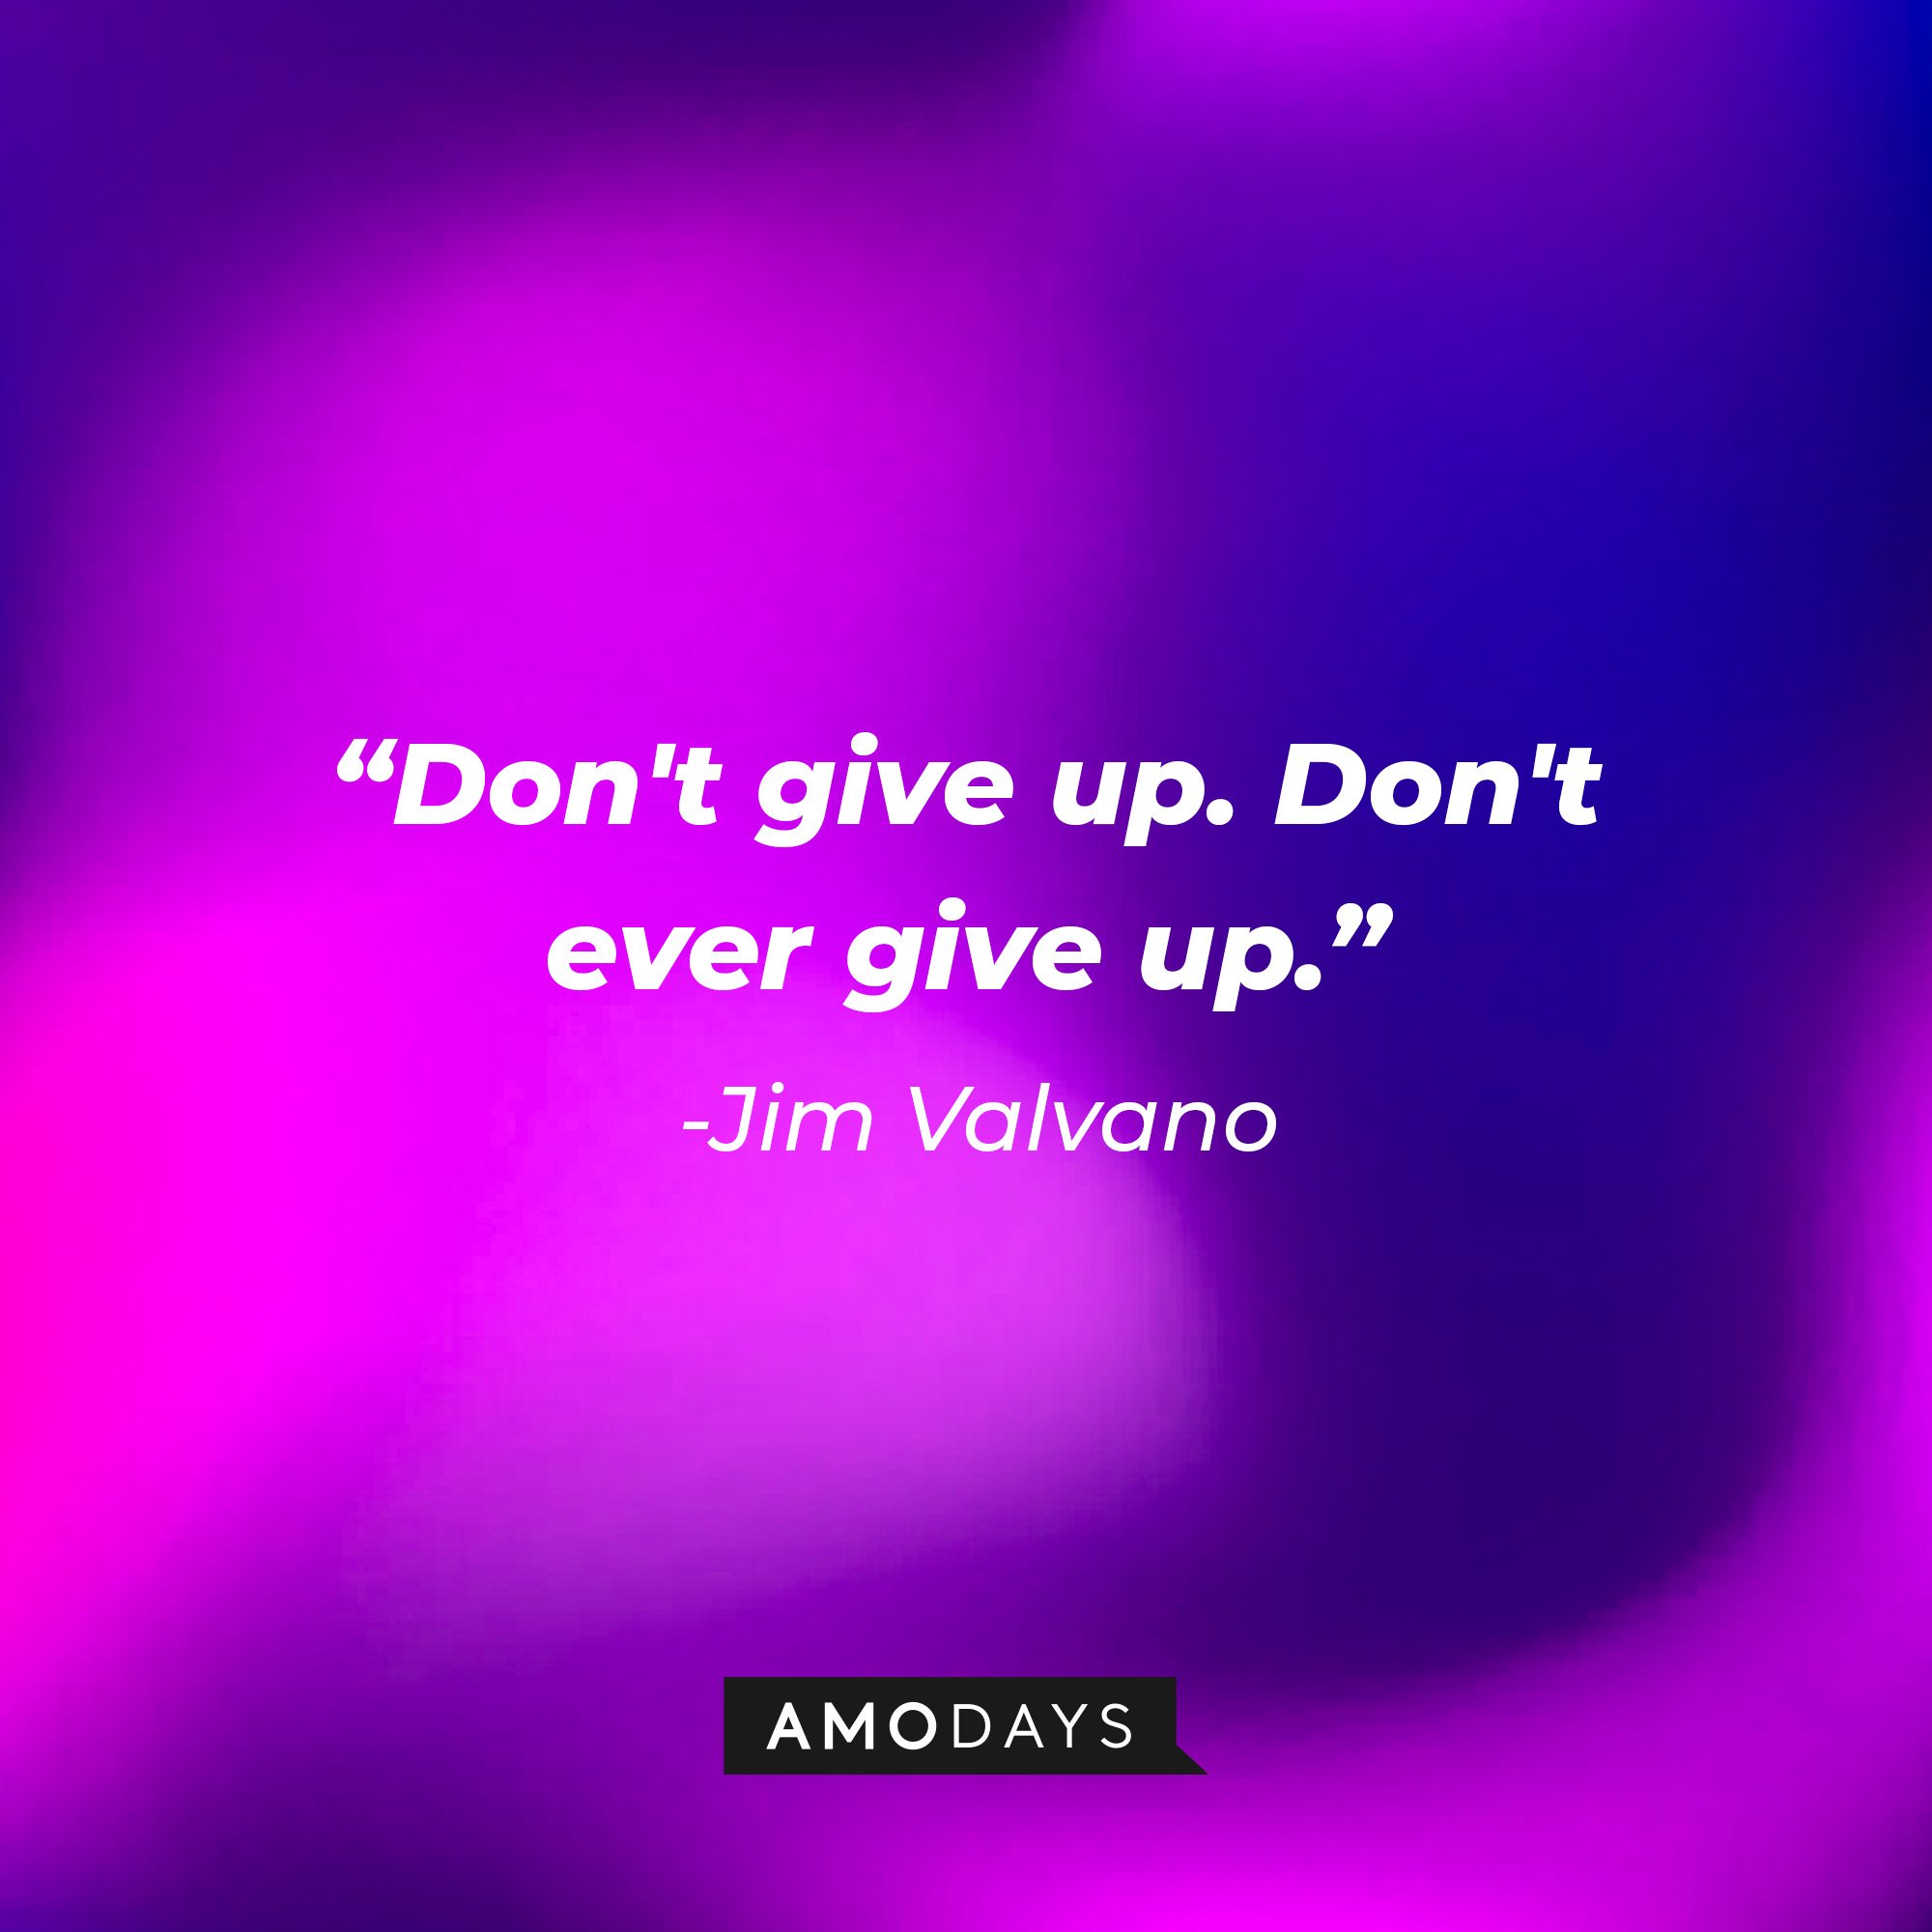 Jim Valvano’s quote: "Don't give up. Don't ever give up." | Image: AmoDays